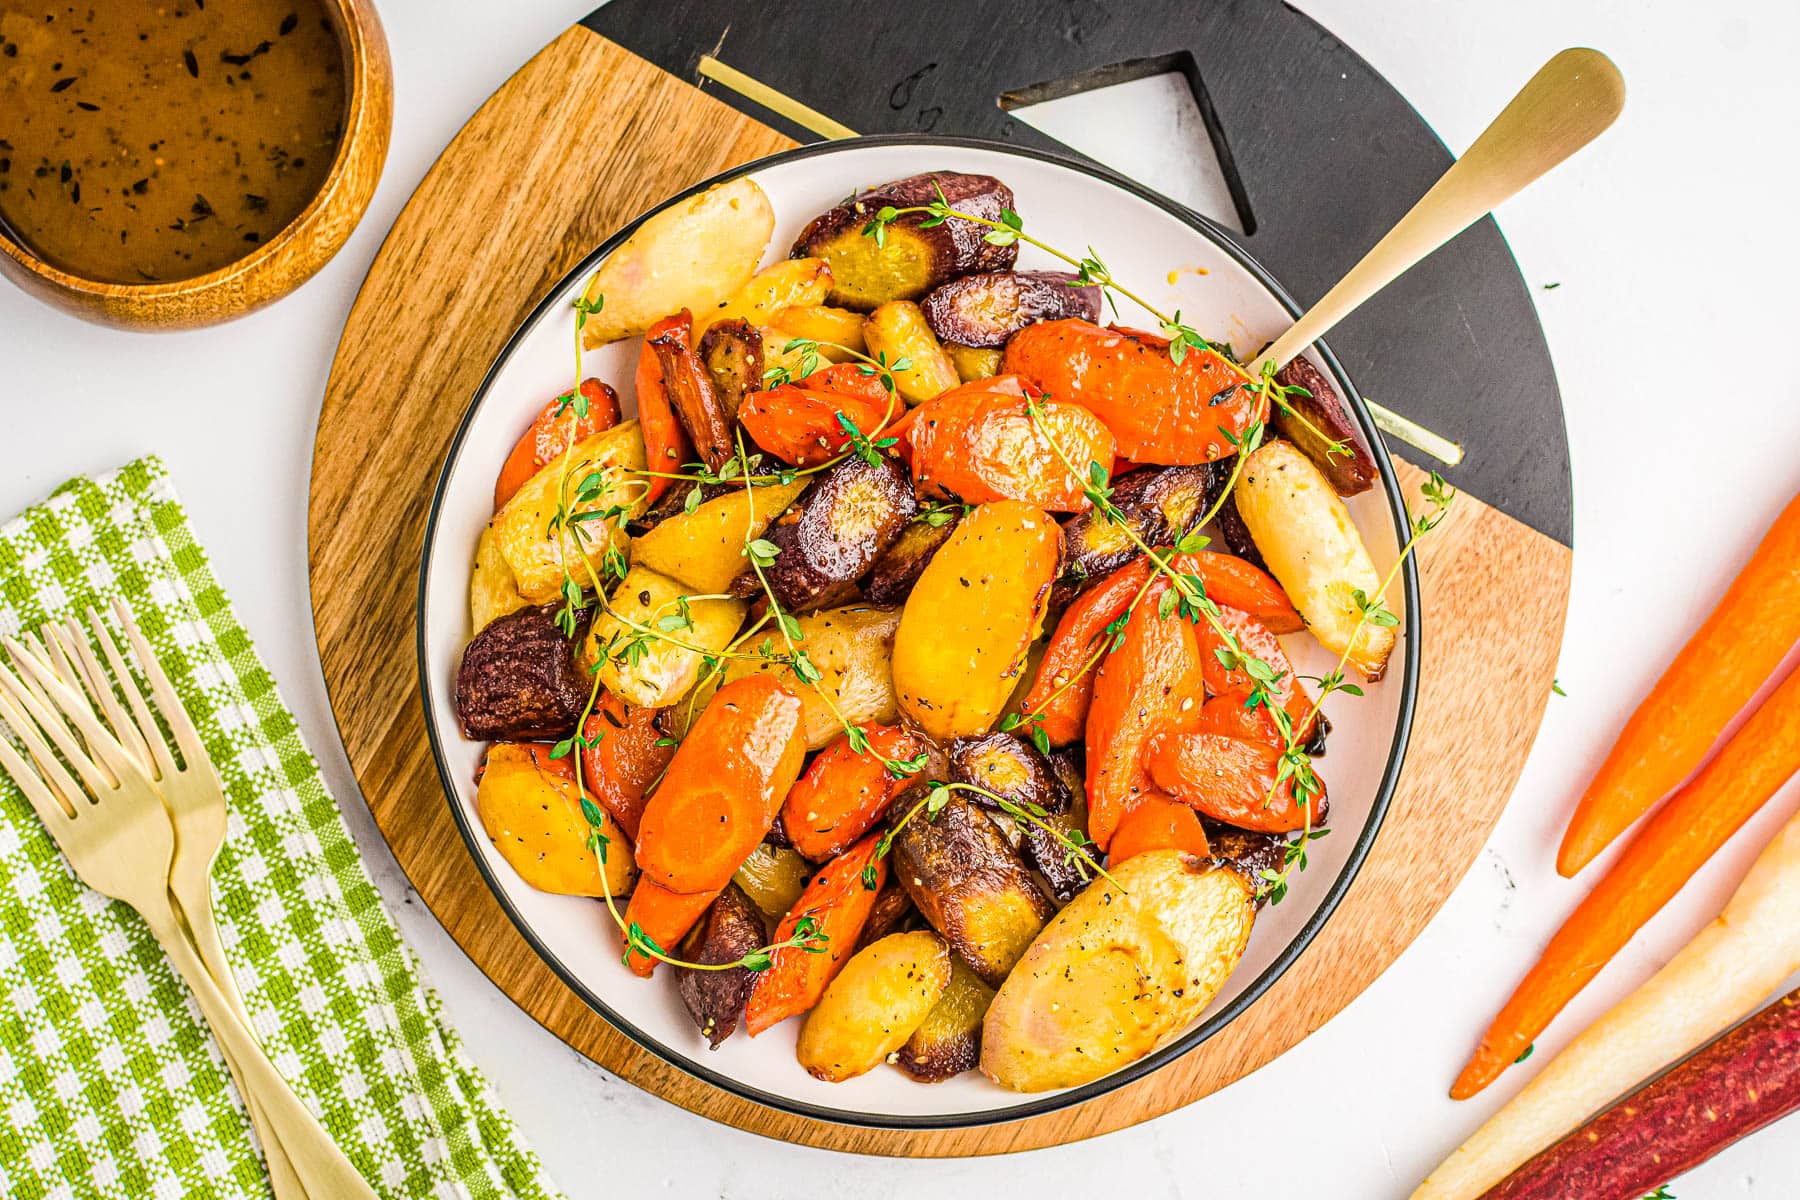 Multicolored carrots with a honey glaze one a plate with a green napkin at the side.